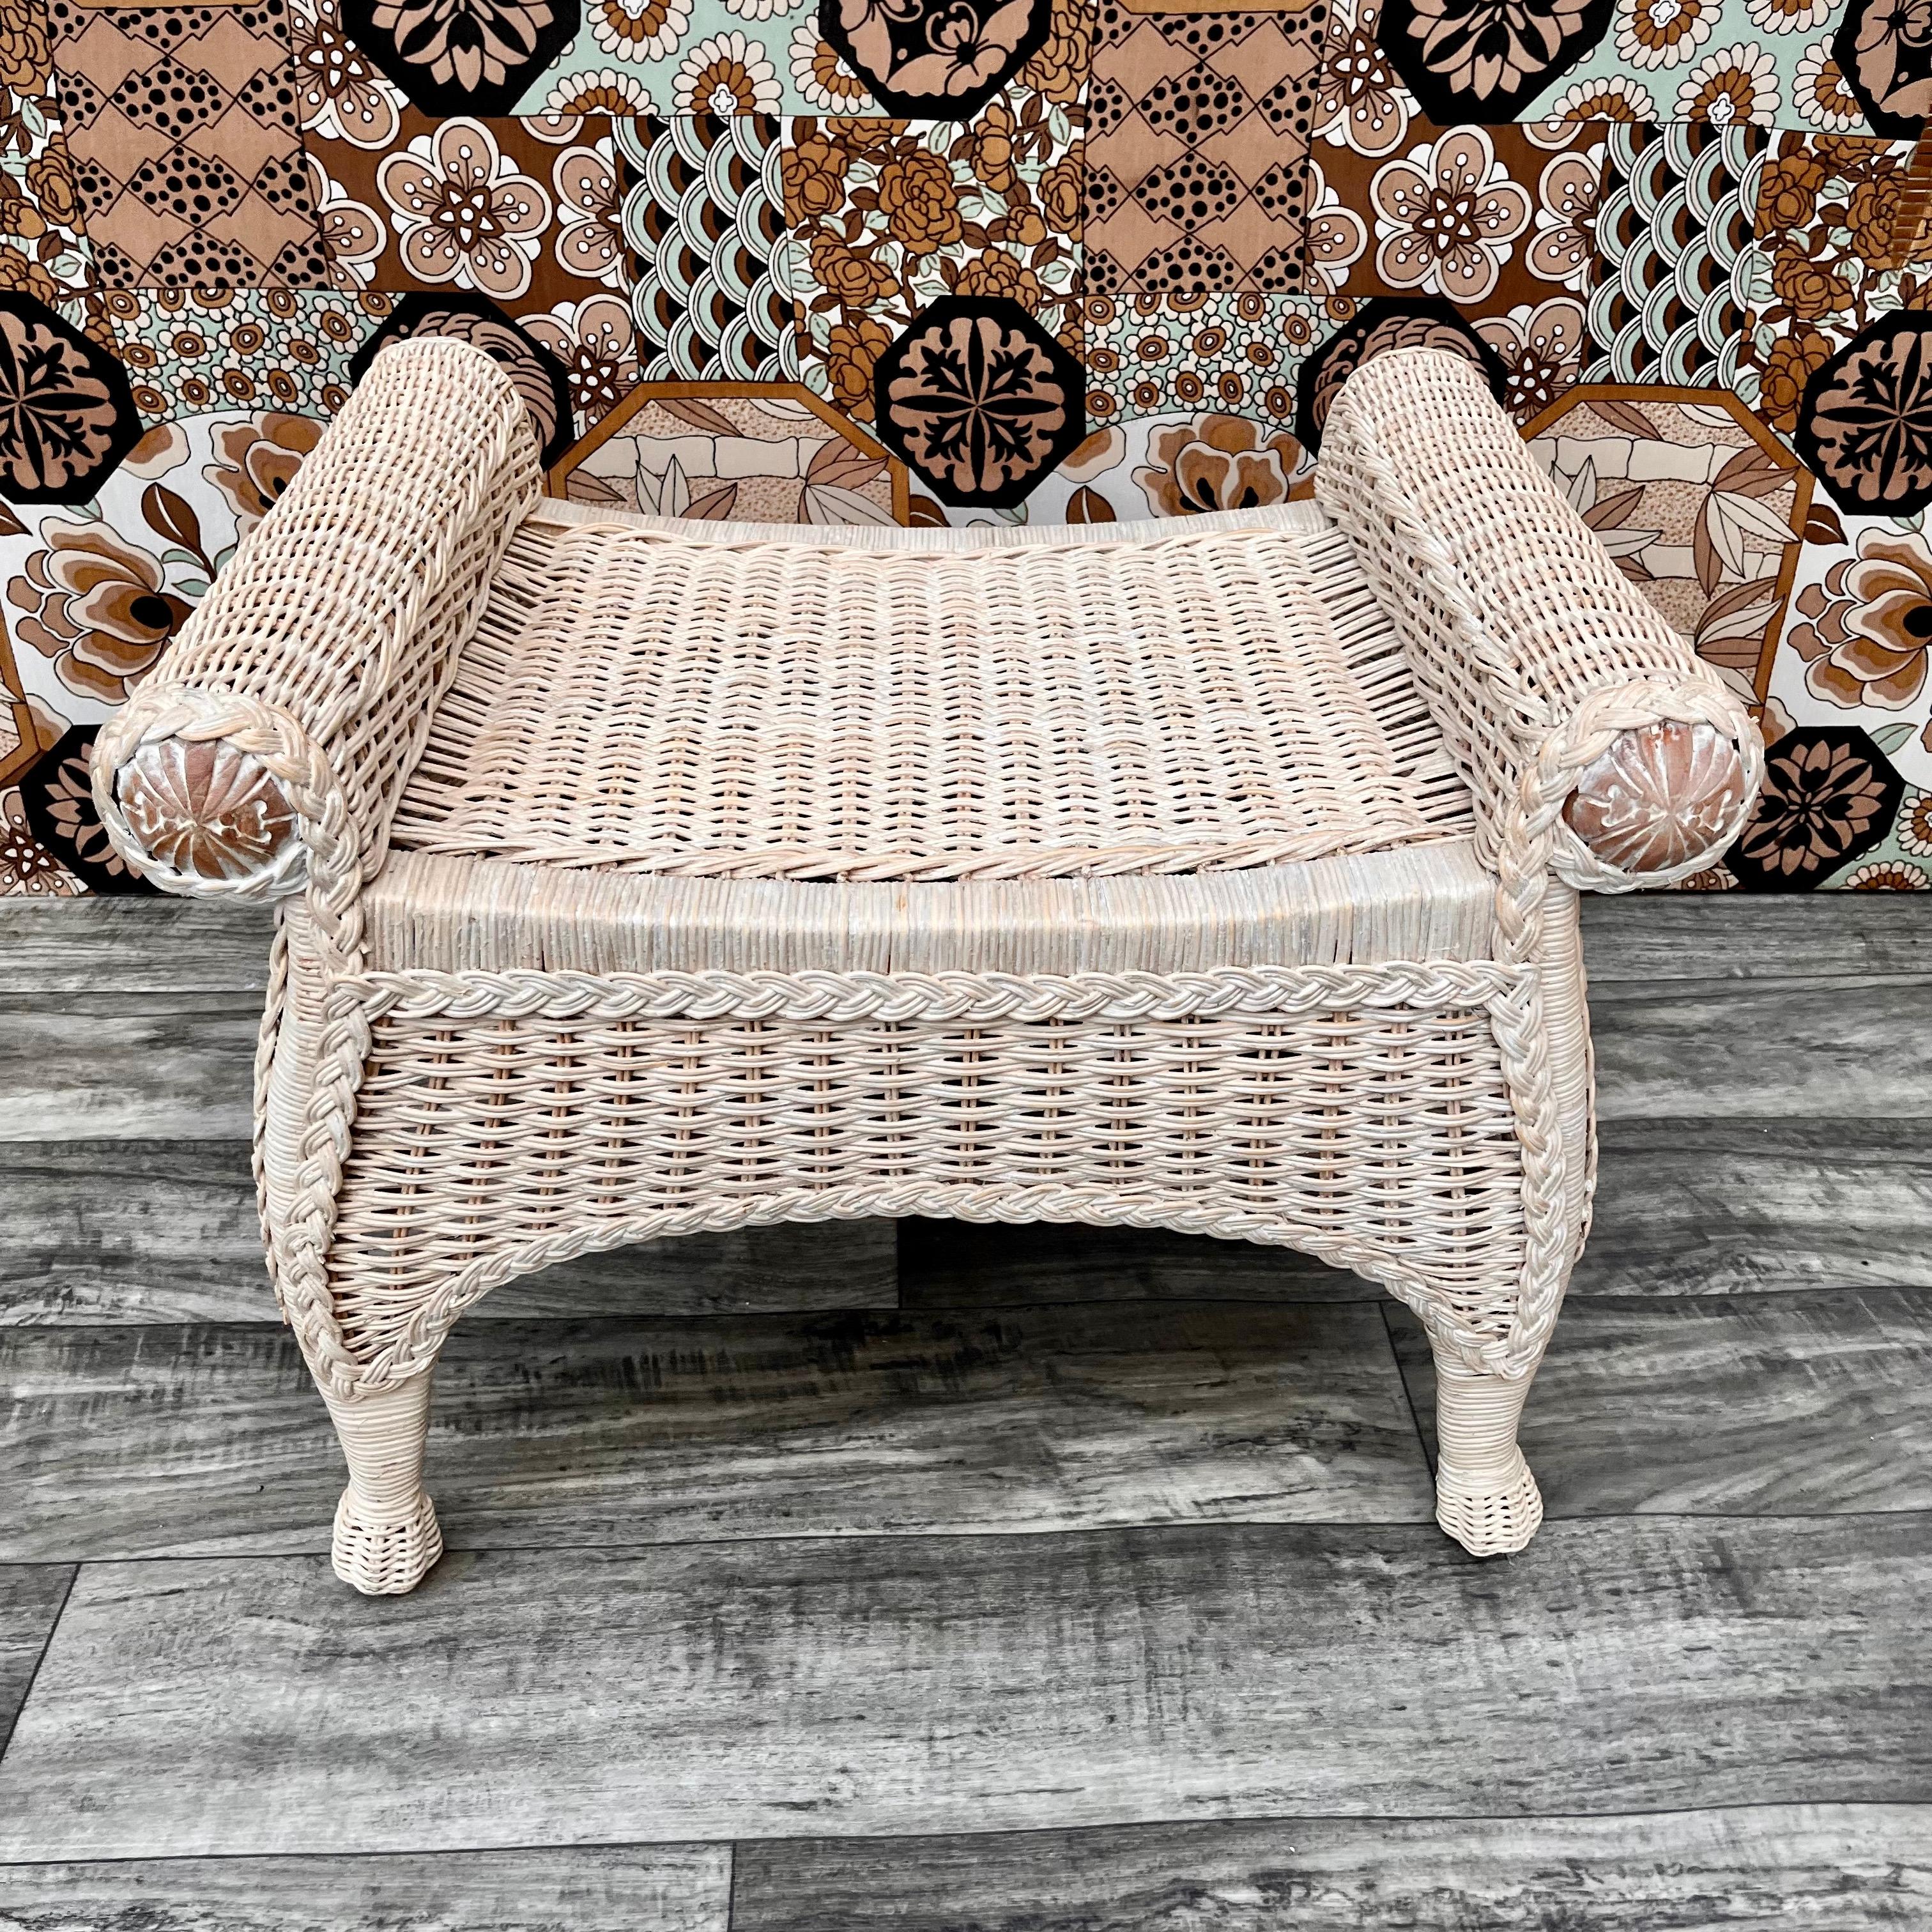 Late 20th Century Boho Chic Coastal Style Rattan Vanity Bench For Sale 1